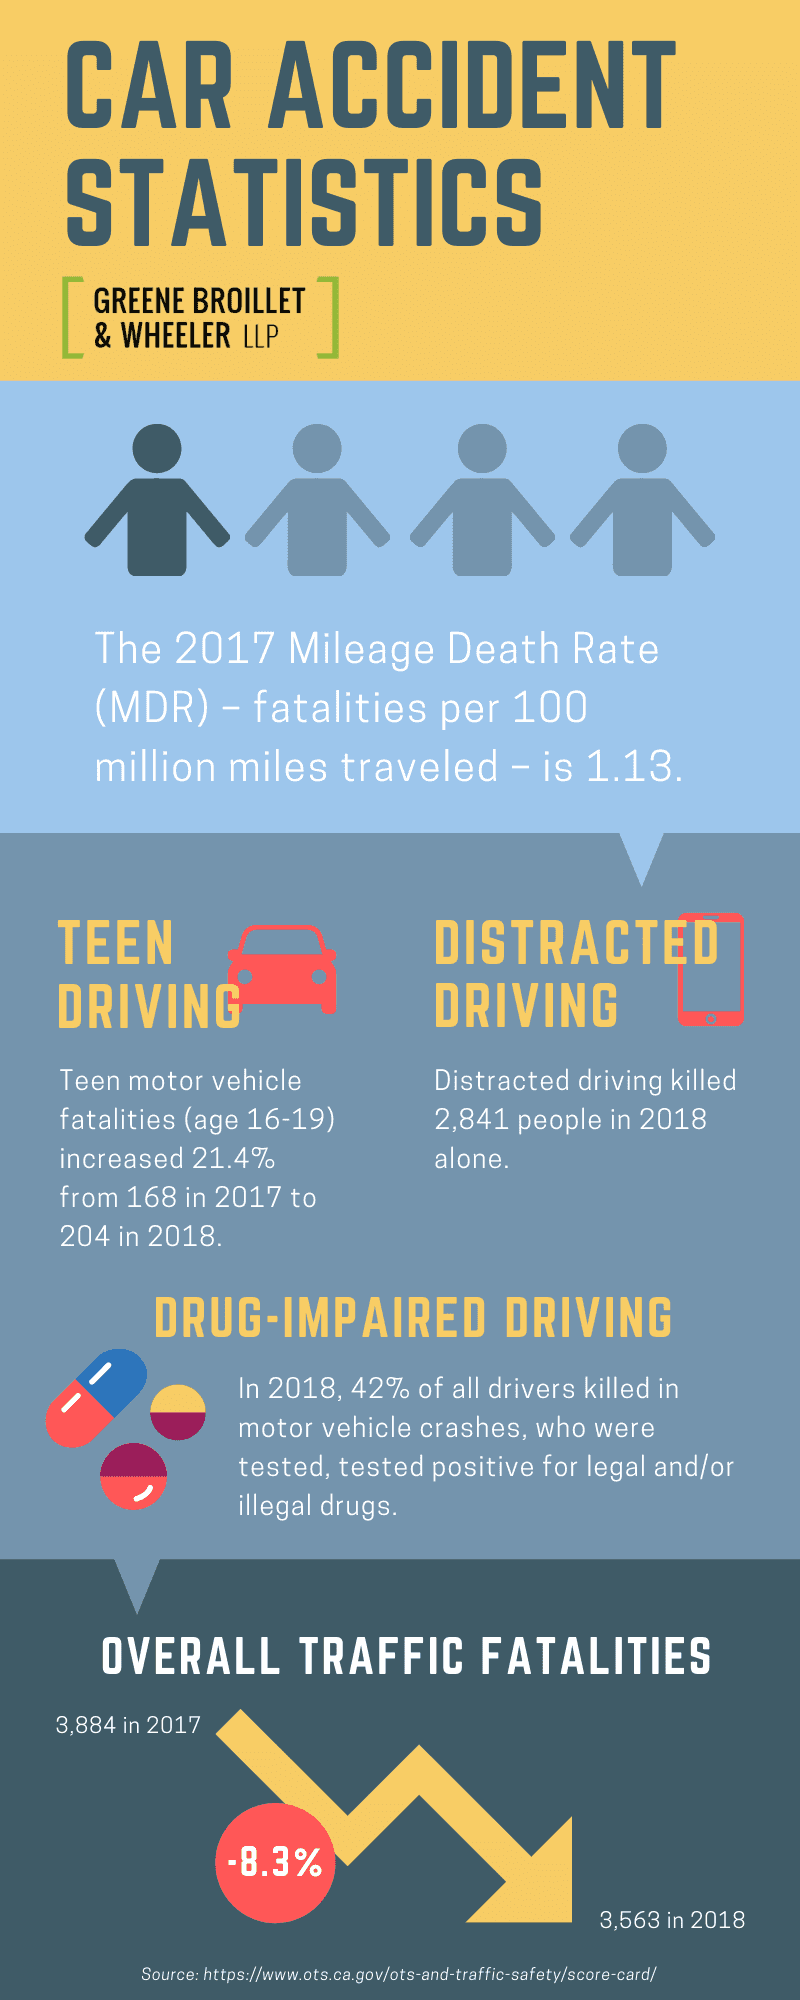 Car accident stats infographic